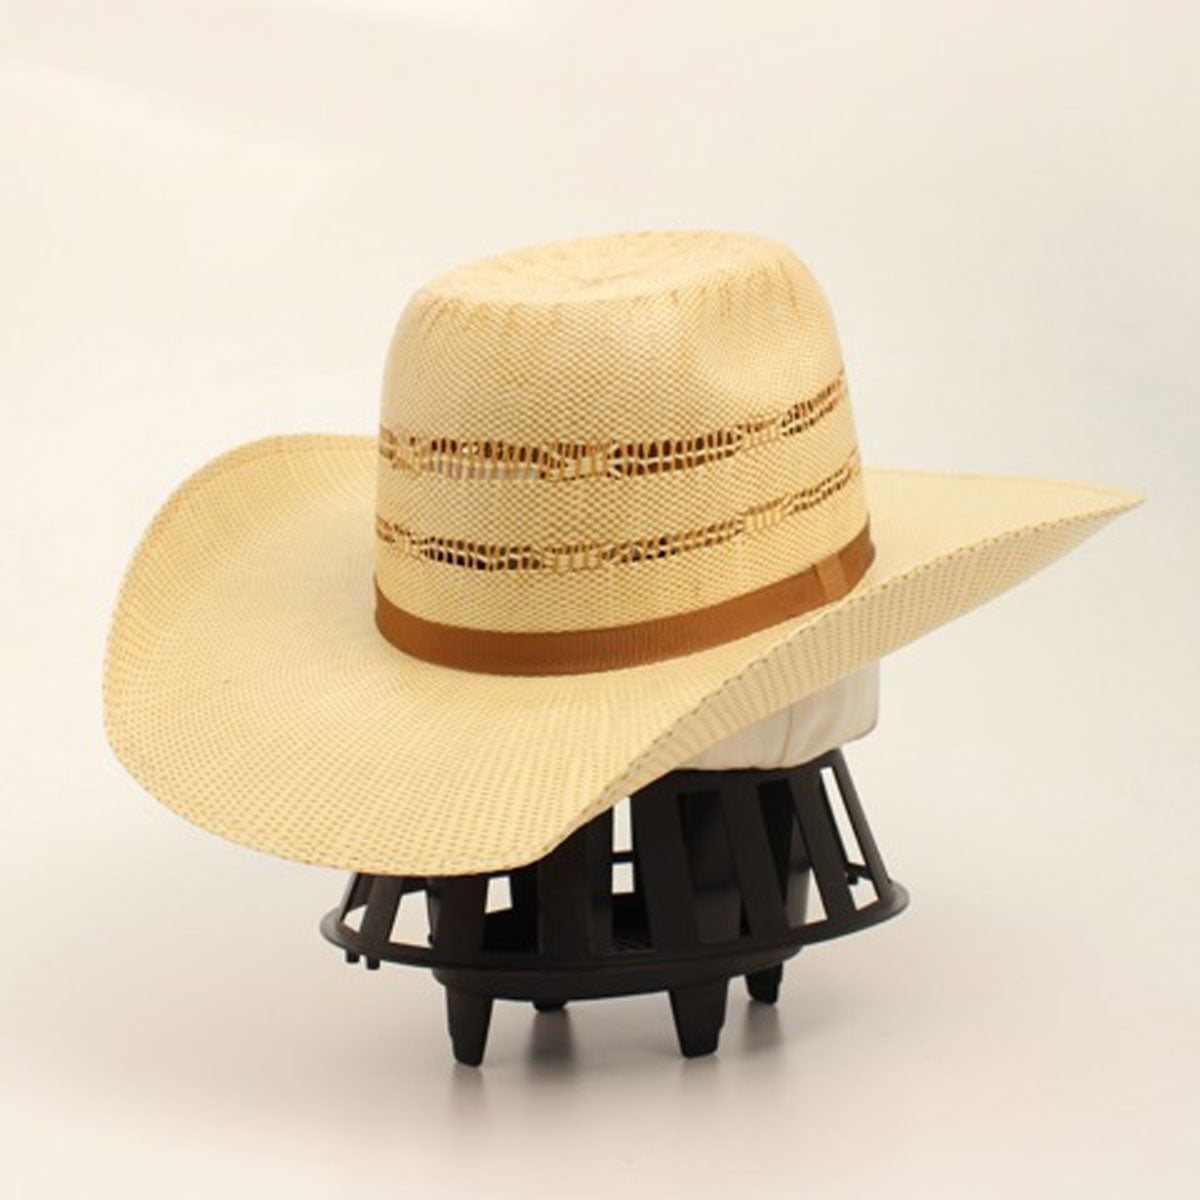 Twister Youth Straw Western Hat - Natural/Tan